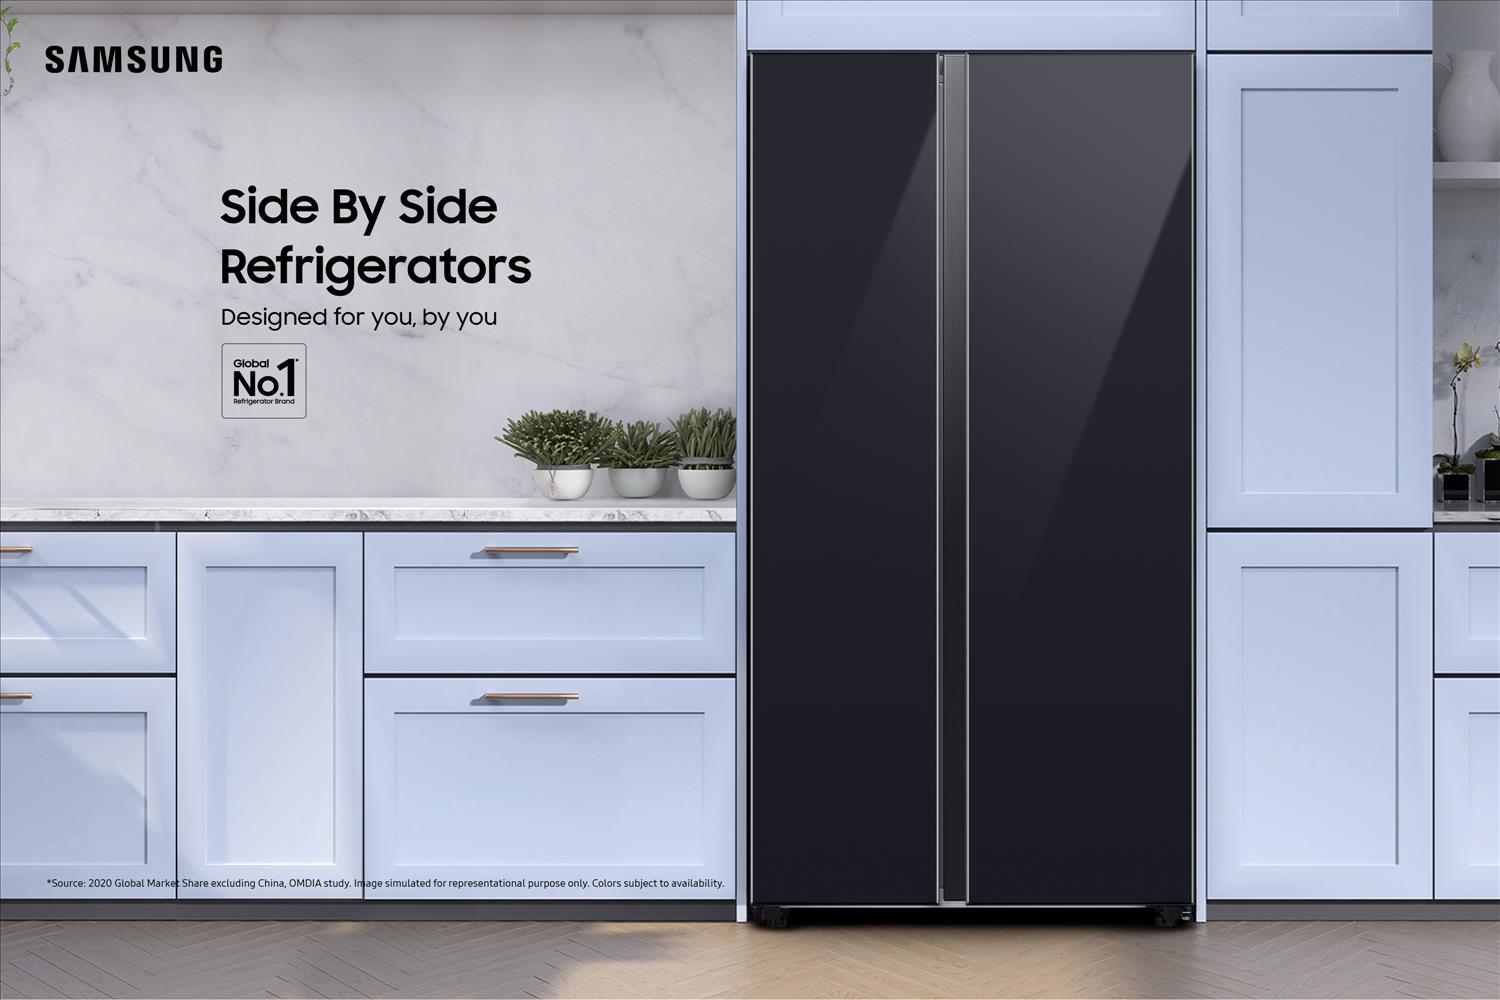 Samsung Launches 2023 Side-By-Side Refrigerator Range With Features Made For India